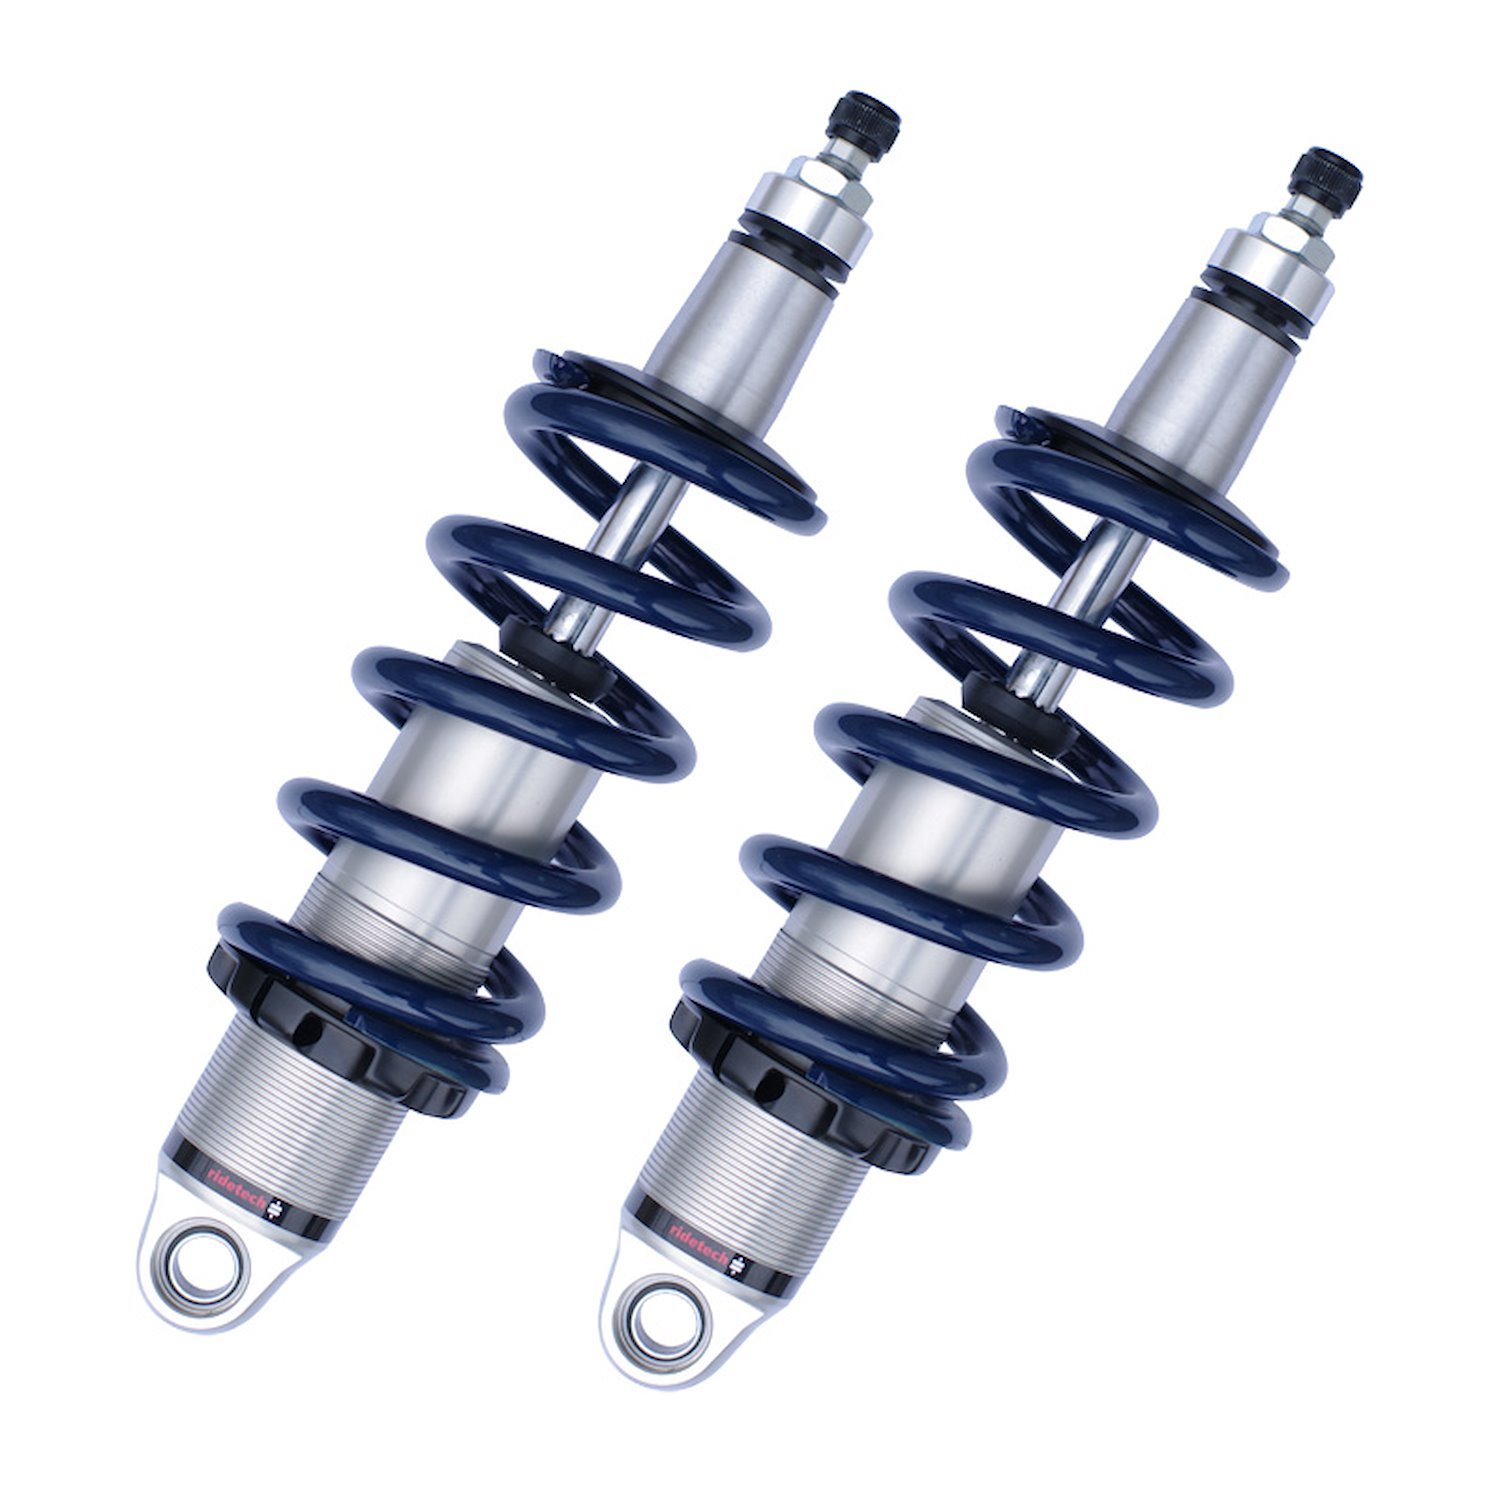 HQ Series front CoilOvers for 82-03 S-10. For use w/ RideTech lower arms. Includes springs sold as pair.